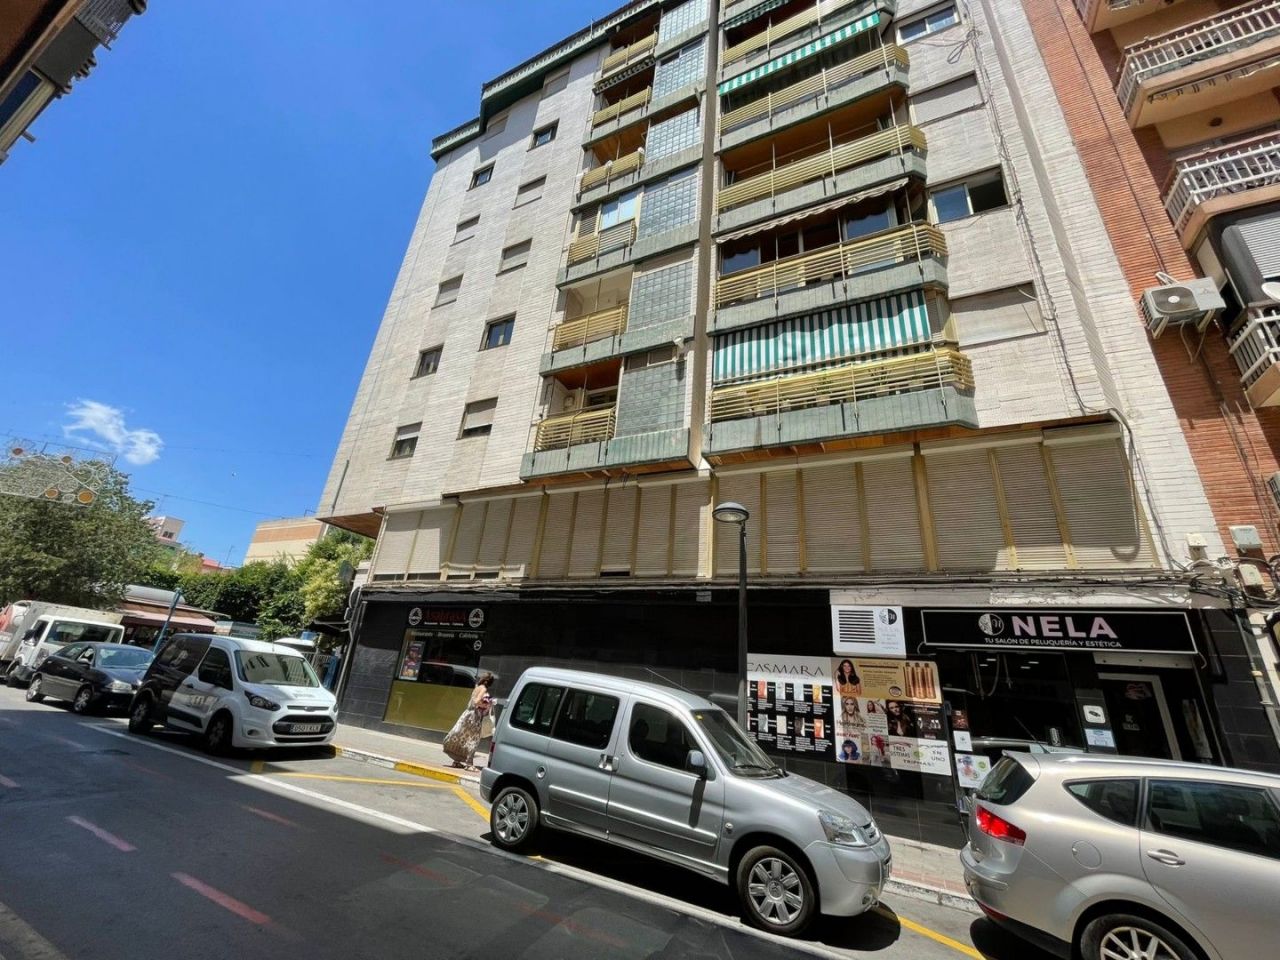 Commercial property in Alicante, Spain, 257 sq.m - picture 1